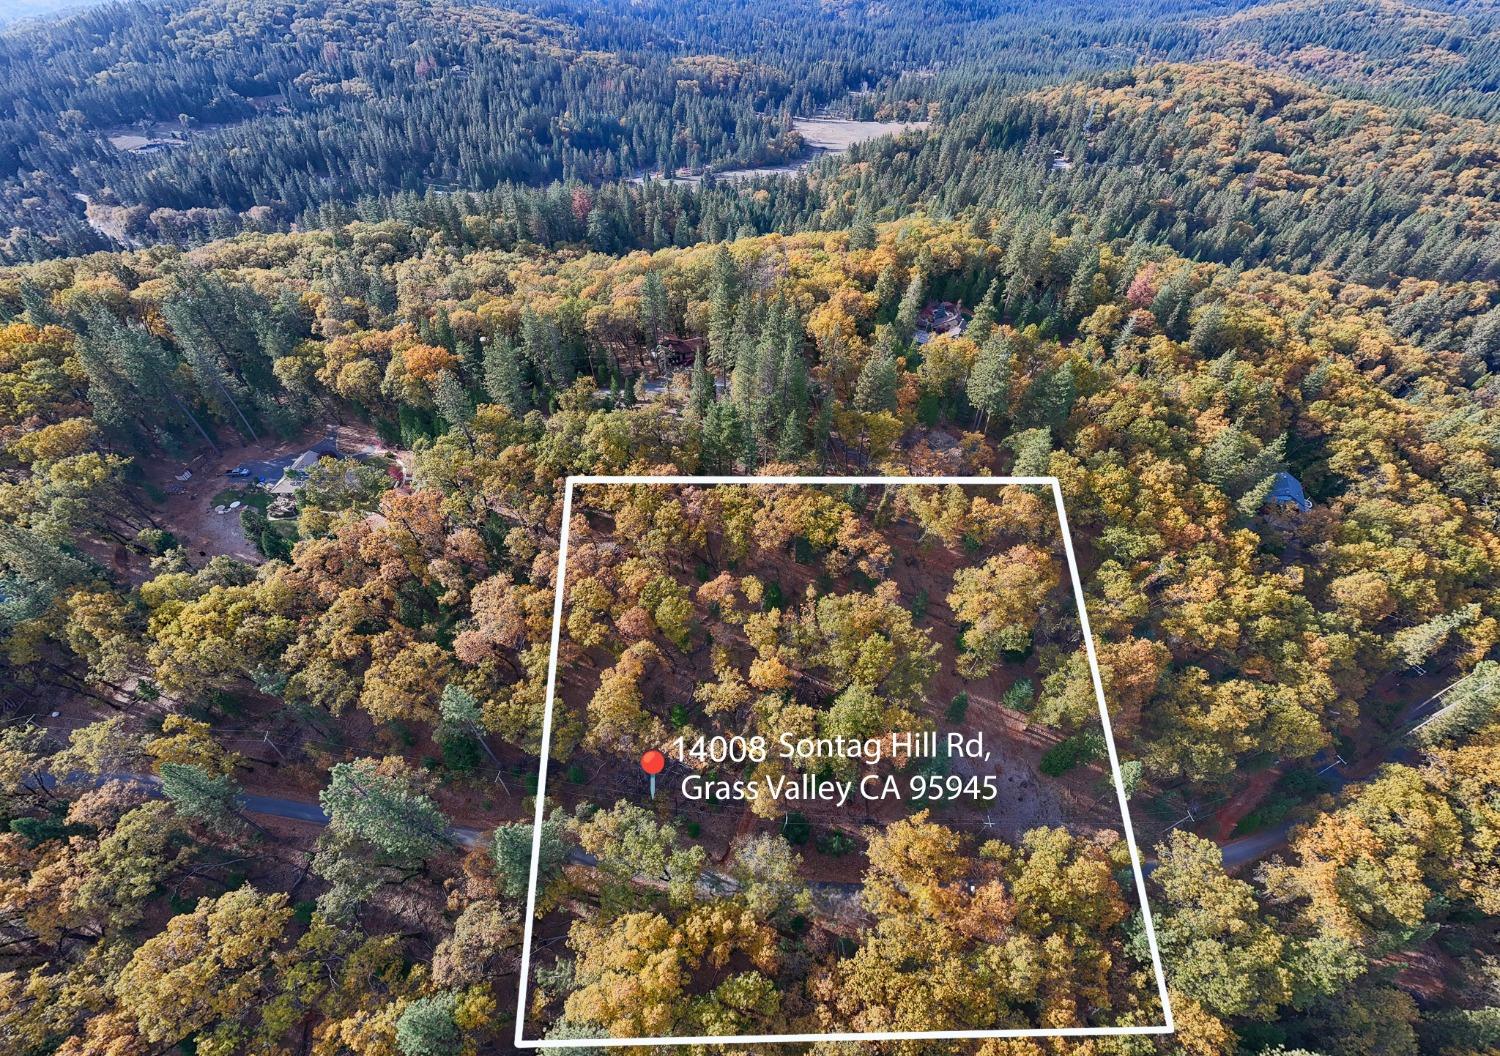 Photo of 14008 Sontag Hill Rd in Grass Valley, CA